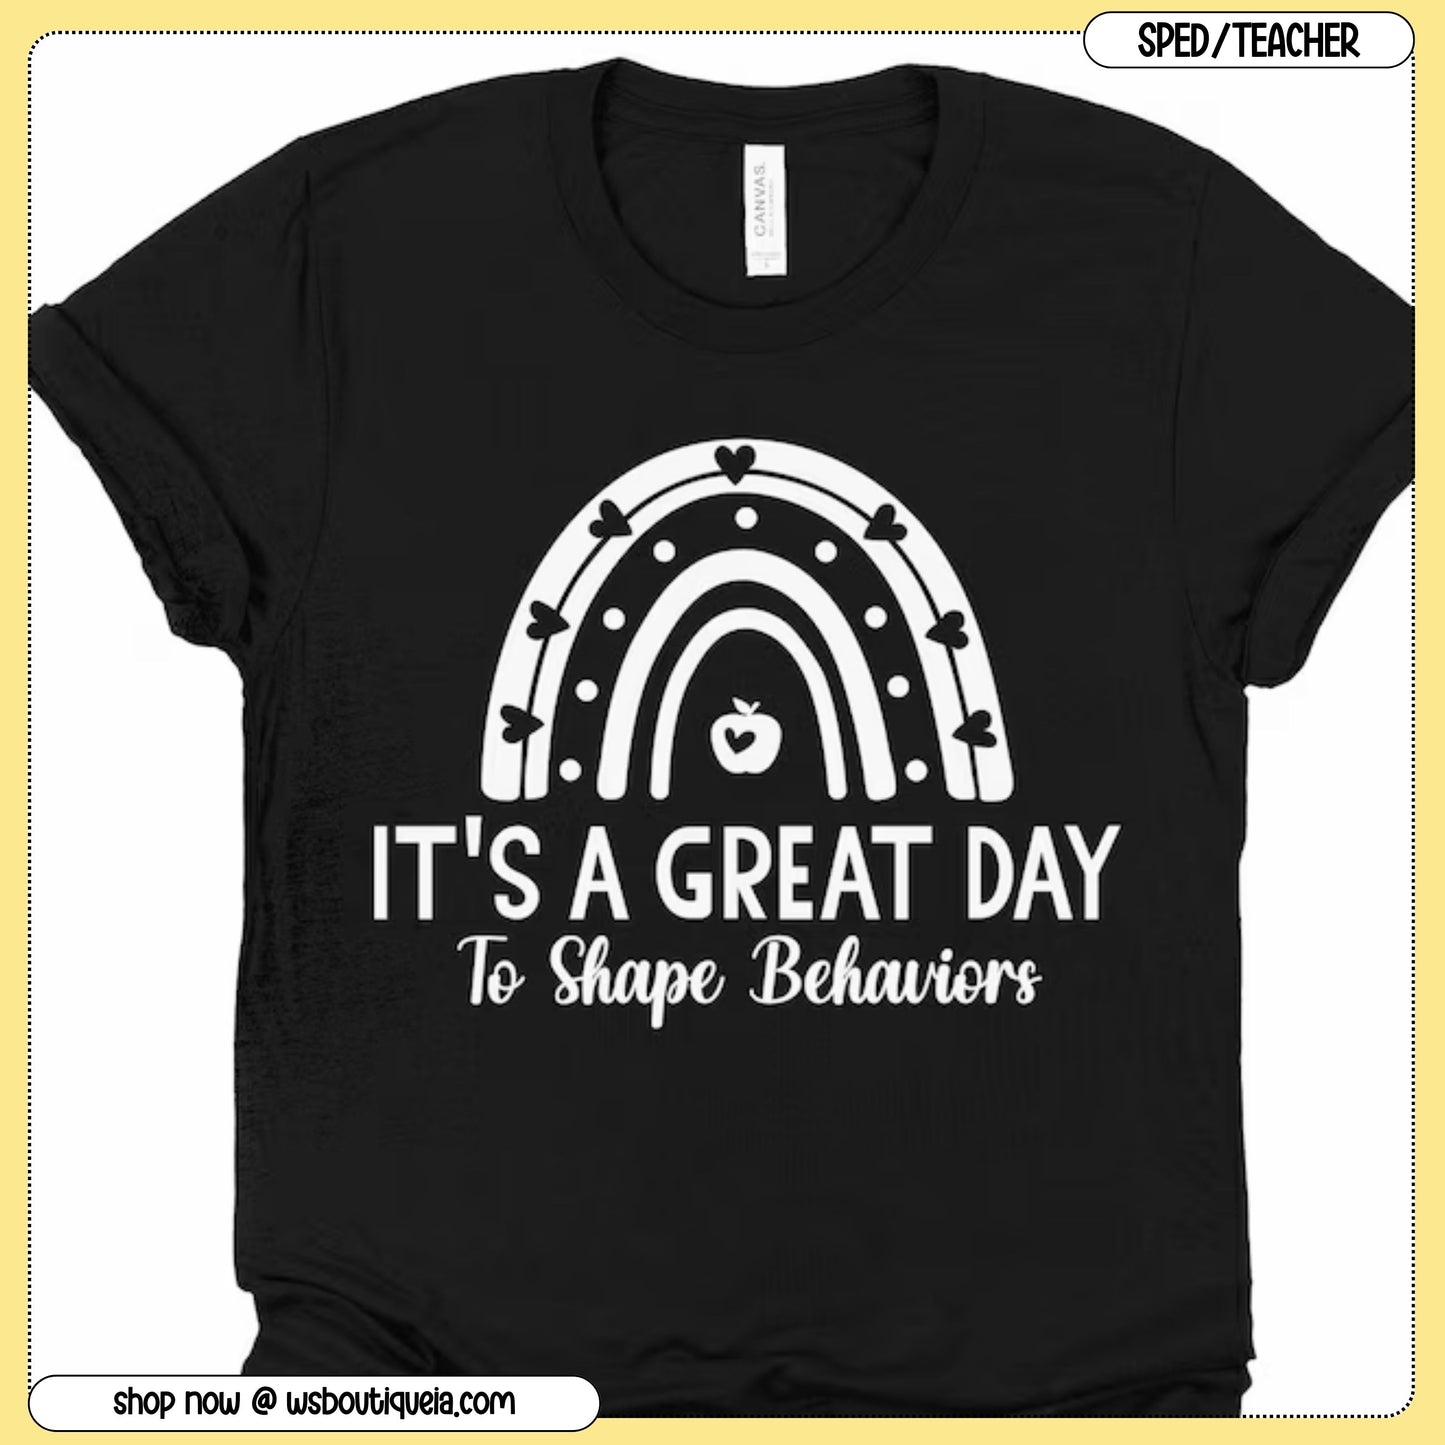 It's A Great Day To Shape Behaviors Special Education Tee/Sweatshirt